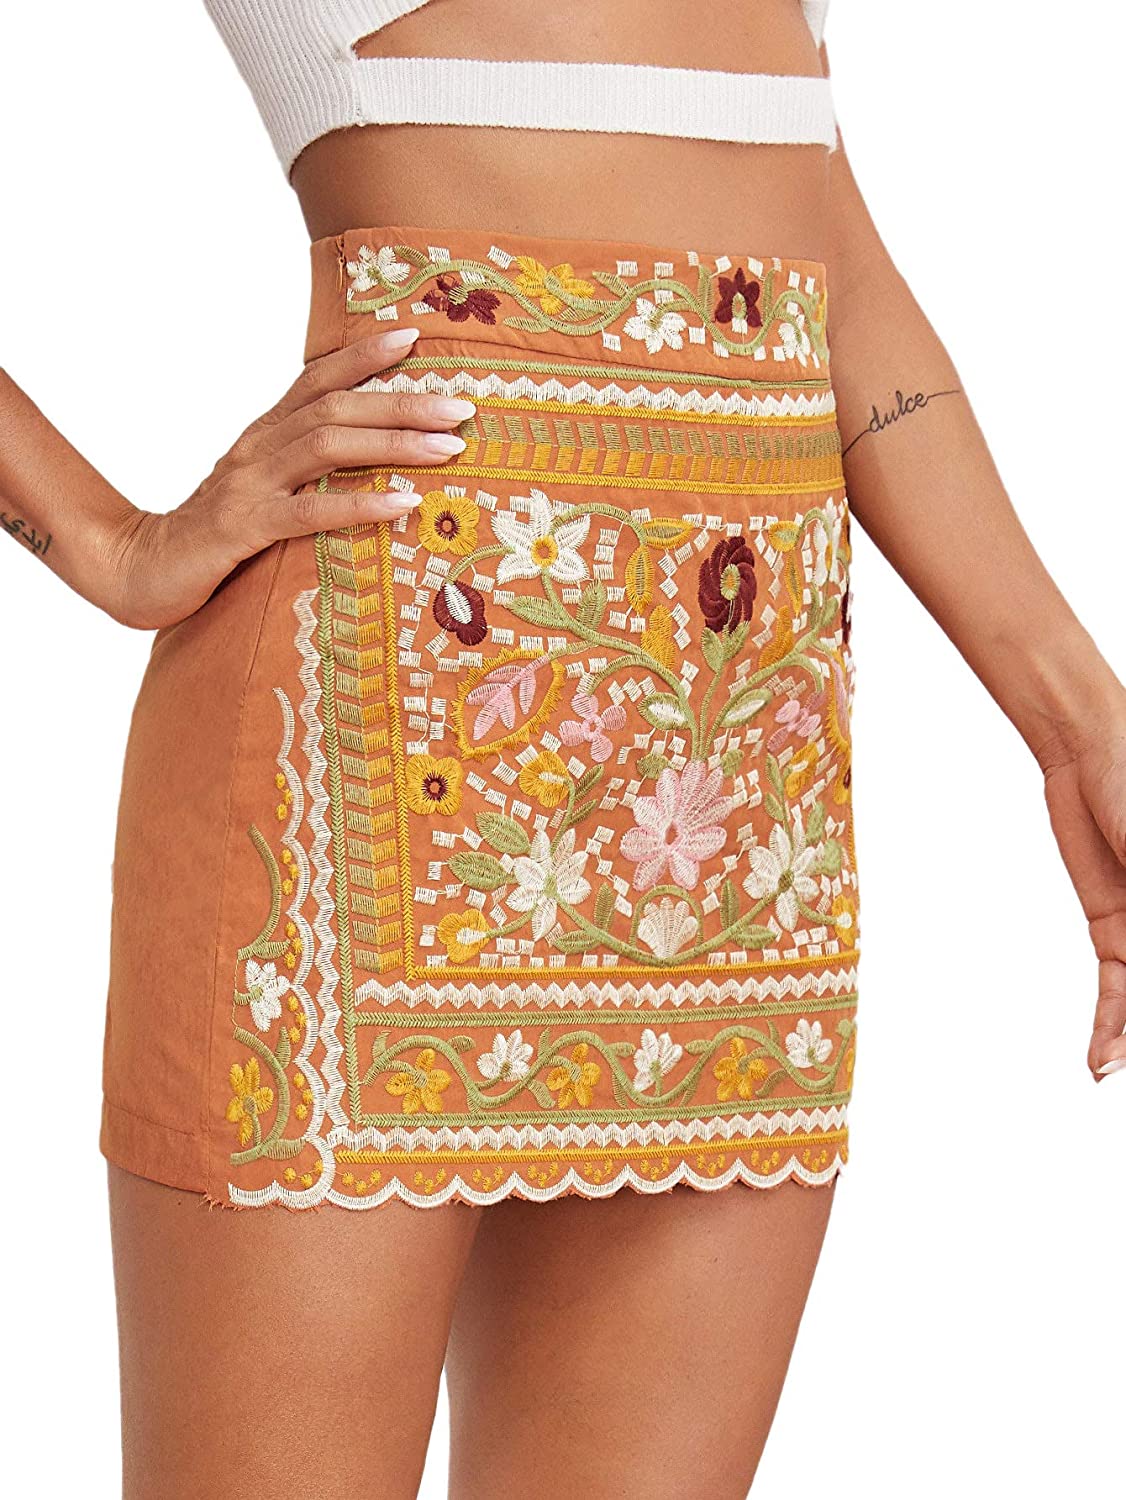 SheIn Women's Casual Floral Embroidered Bodycon Short Mini Skirt | eBay